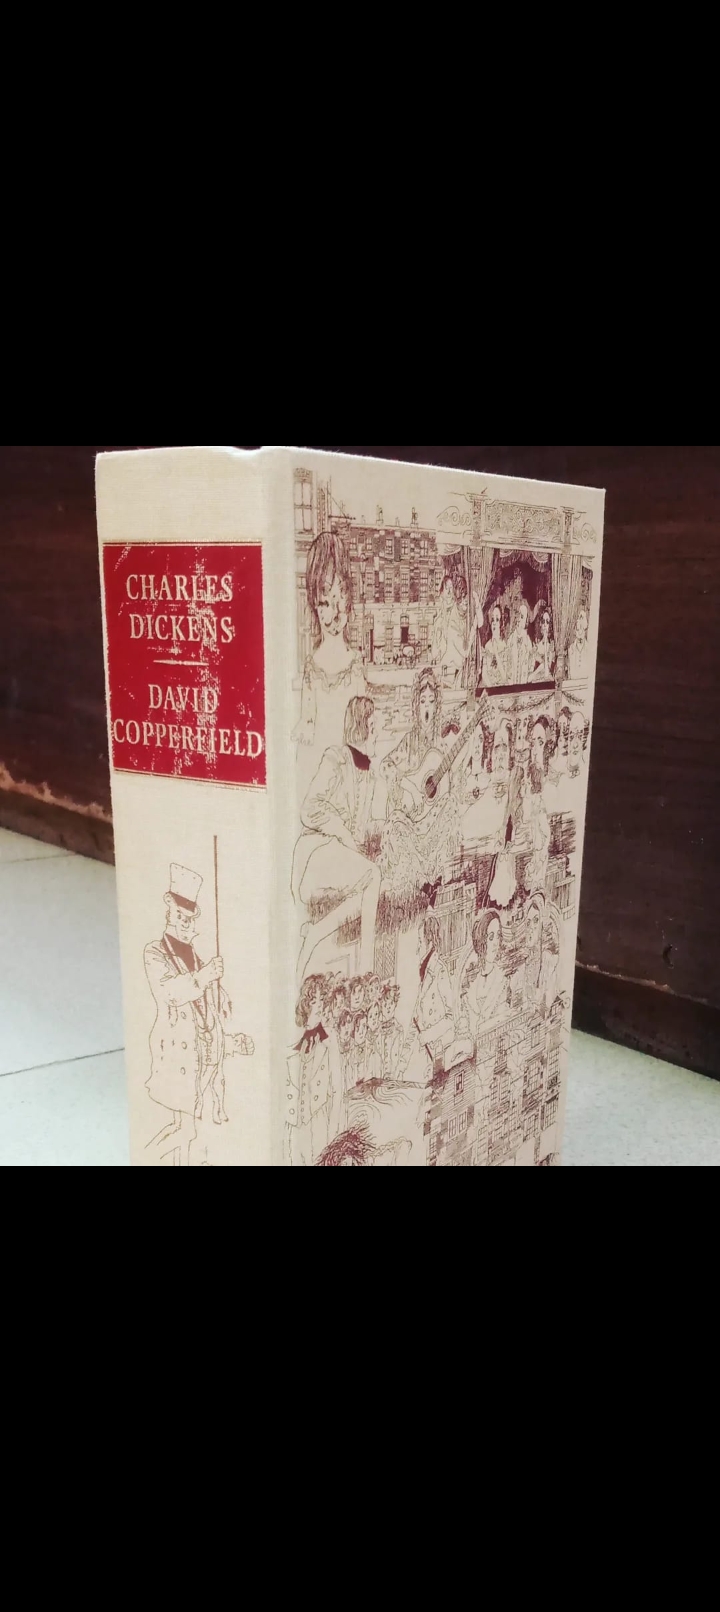 david copperfield by charles dickens with illustration from london the folio society. original hardc